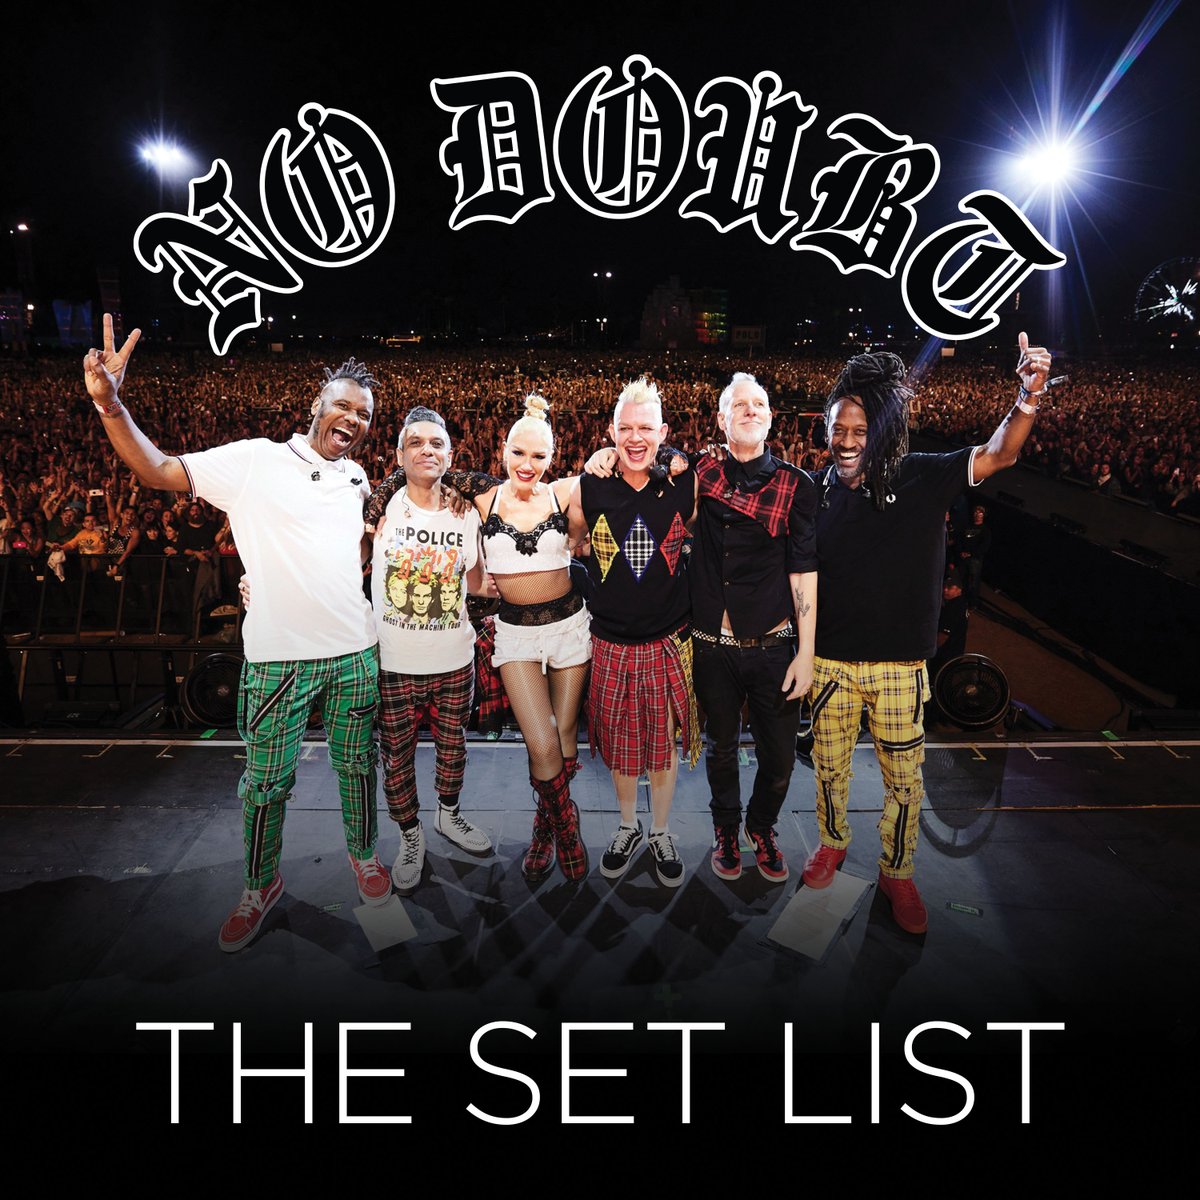 We had two incredible weekends playing @Coachella! Whether you were there or watching the livestream, relive the night with The Setlist official playlist! Listen now: NoDoubt.lnk.to/TheSetList #Coachella #Coachella2024